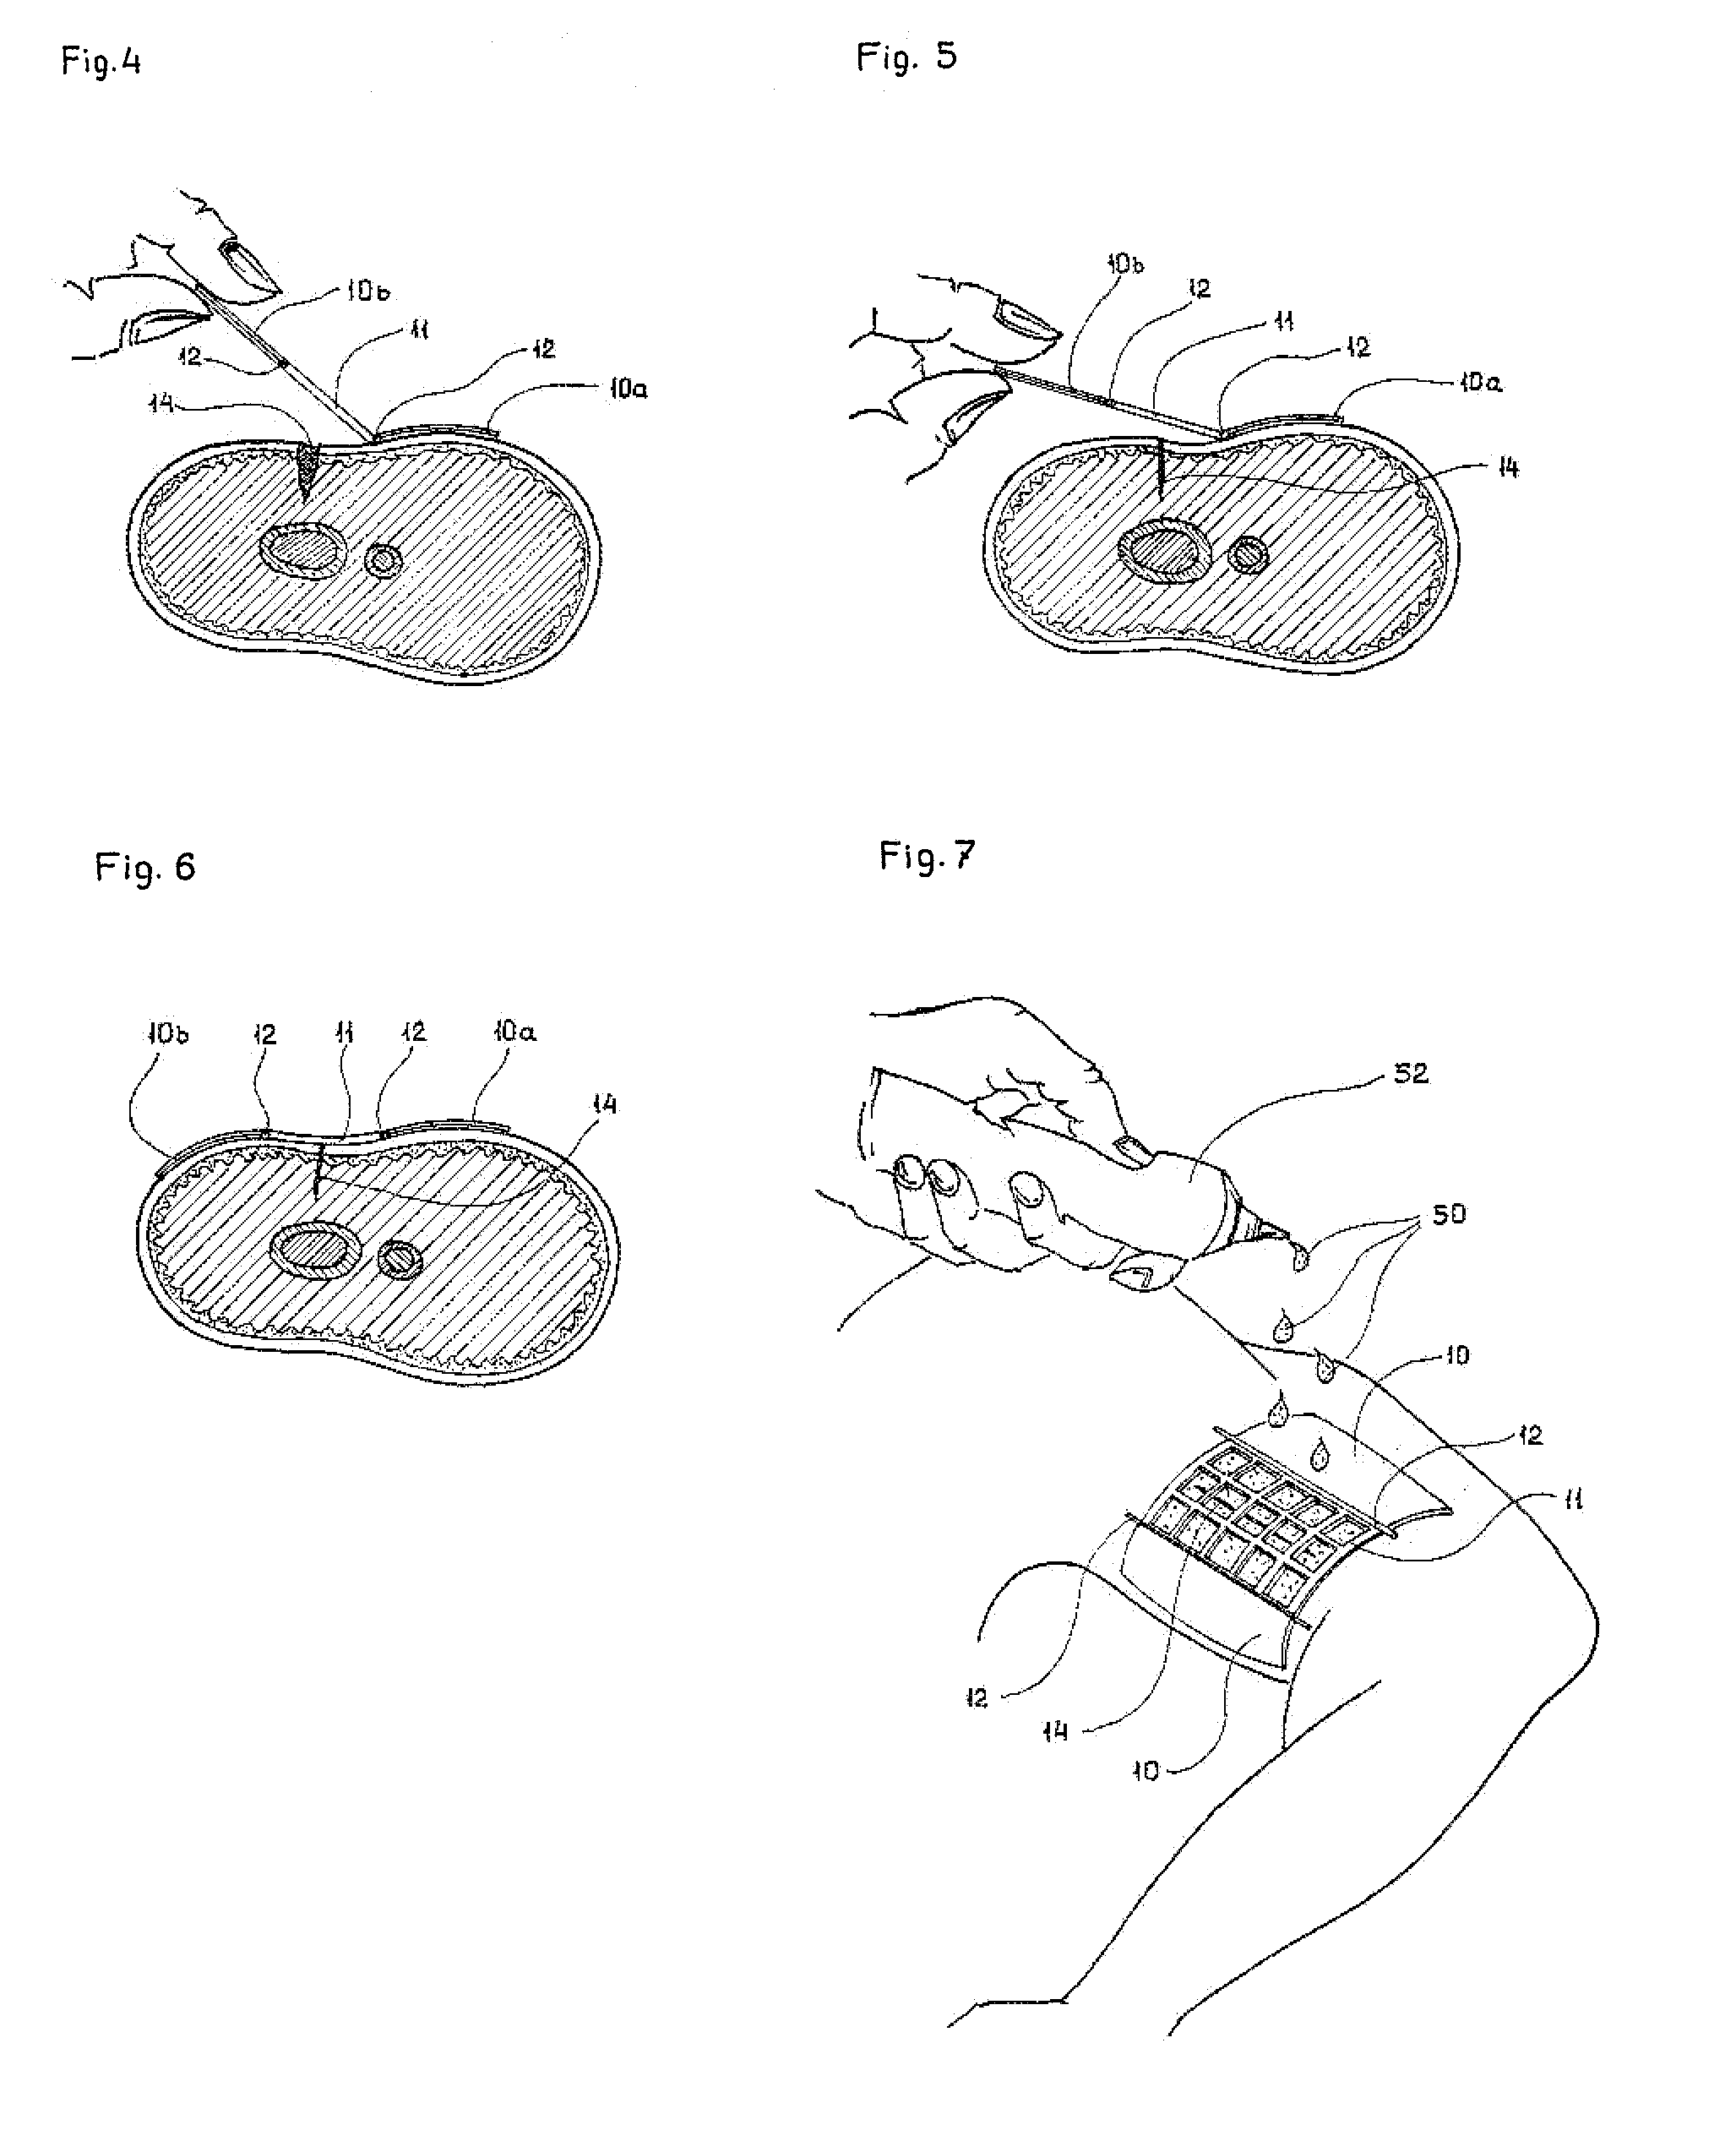 Surgical bandage and methods for treating open wounds